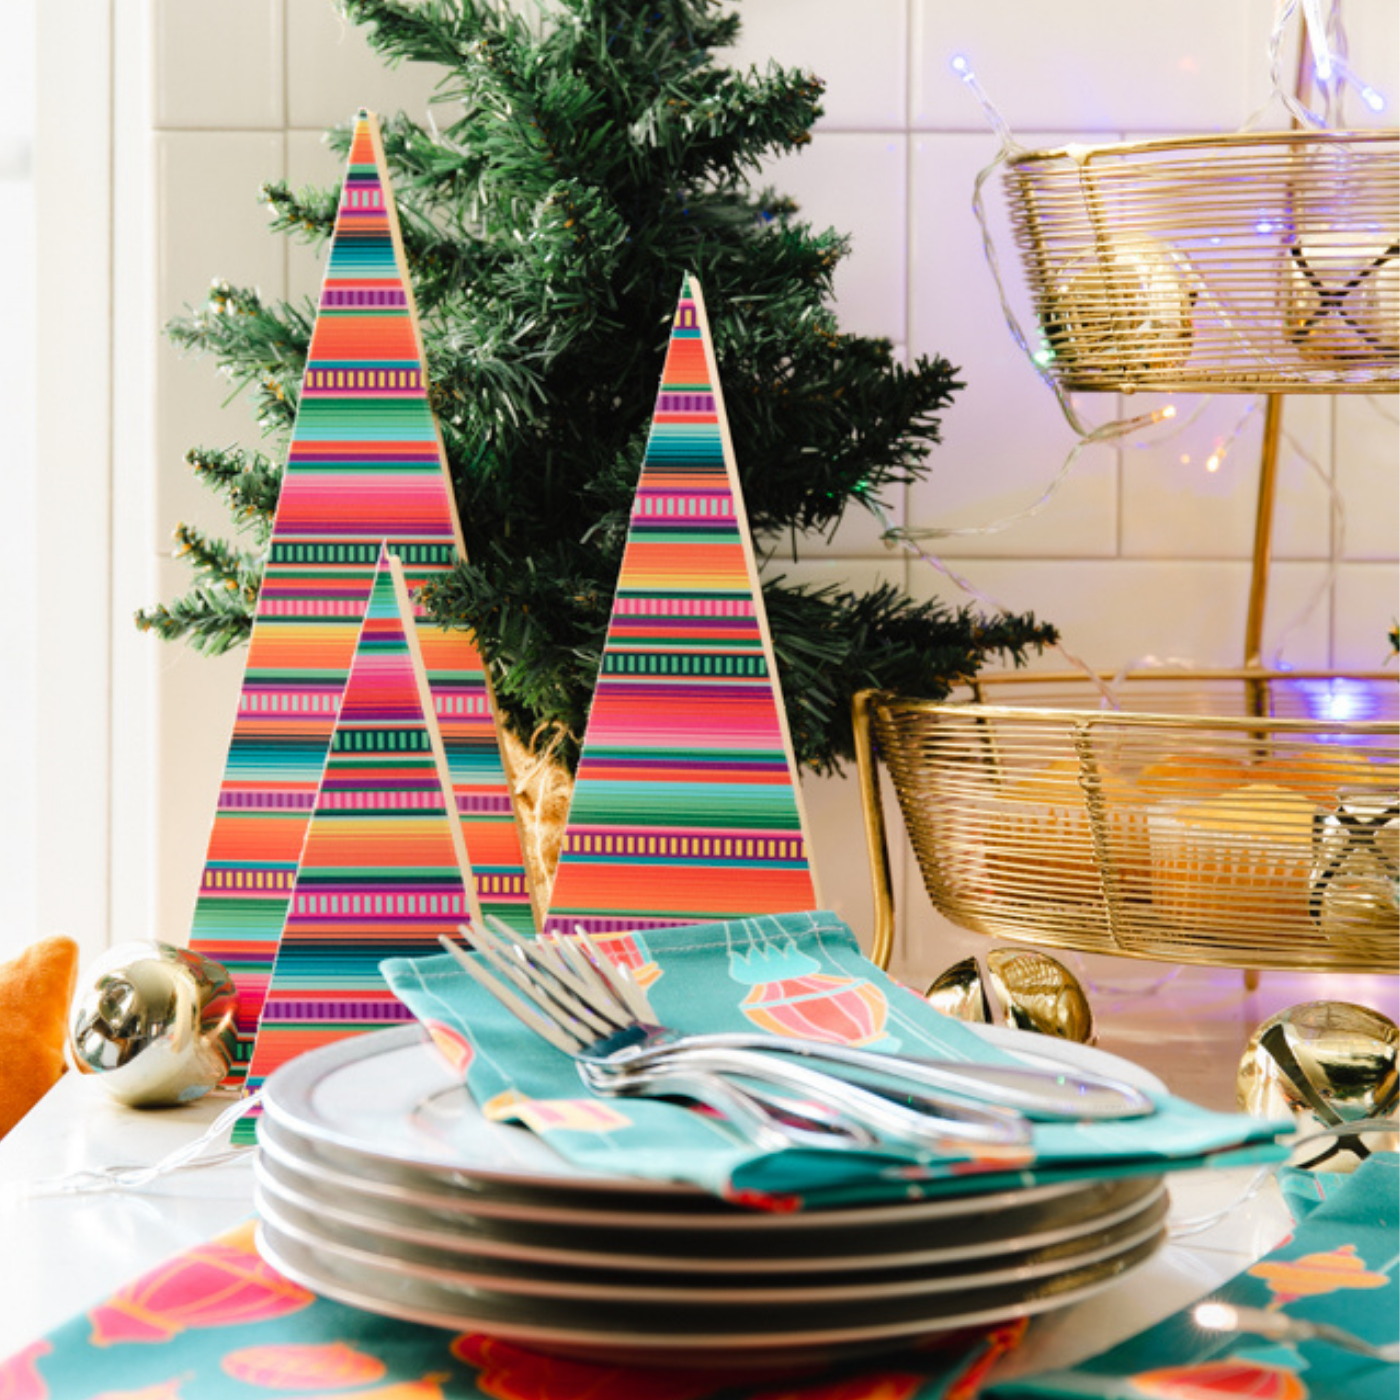 Three small Christmas trees, all comprised of triangles made out of wood, with short-width bottoms and long sides, are covered in pick-and-stick wallpaper with a brightly colored design with pink, red, blue, yellow and green horizontal stripes. The trees are part of a tablescape and placed in front a small tabletop artificial Christmas tree and behind a stack of 5 small white plates that has teal napkins with pink-and-orange-striped napkins on top of it. Several silver forks are placed on top of the napkins.